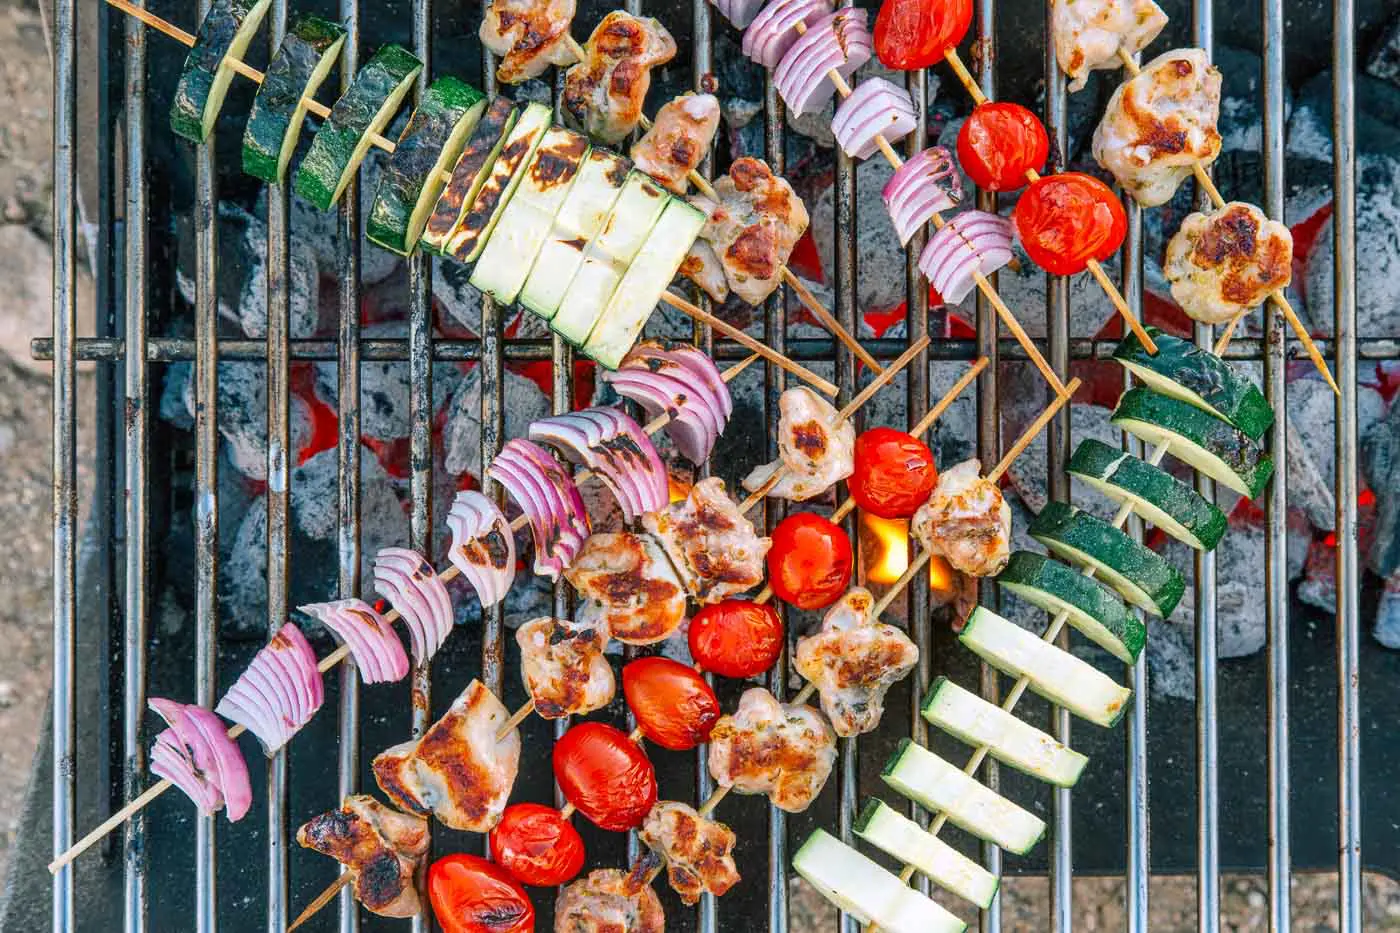 Skewered vegetables and chicken on a grill